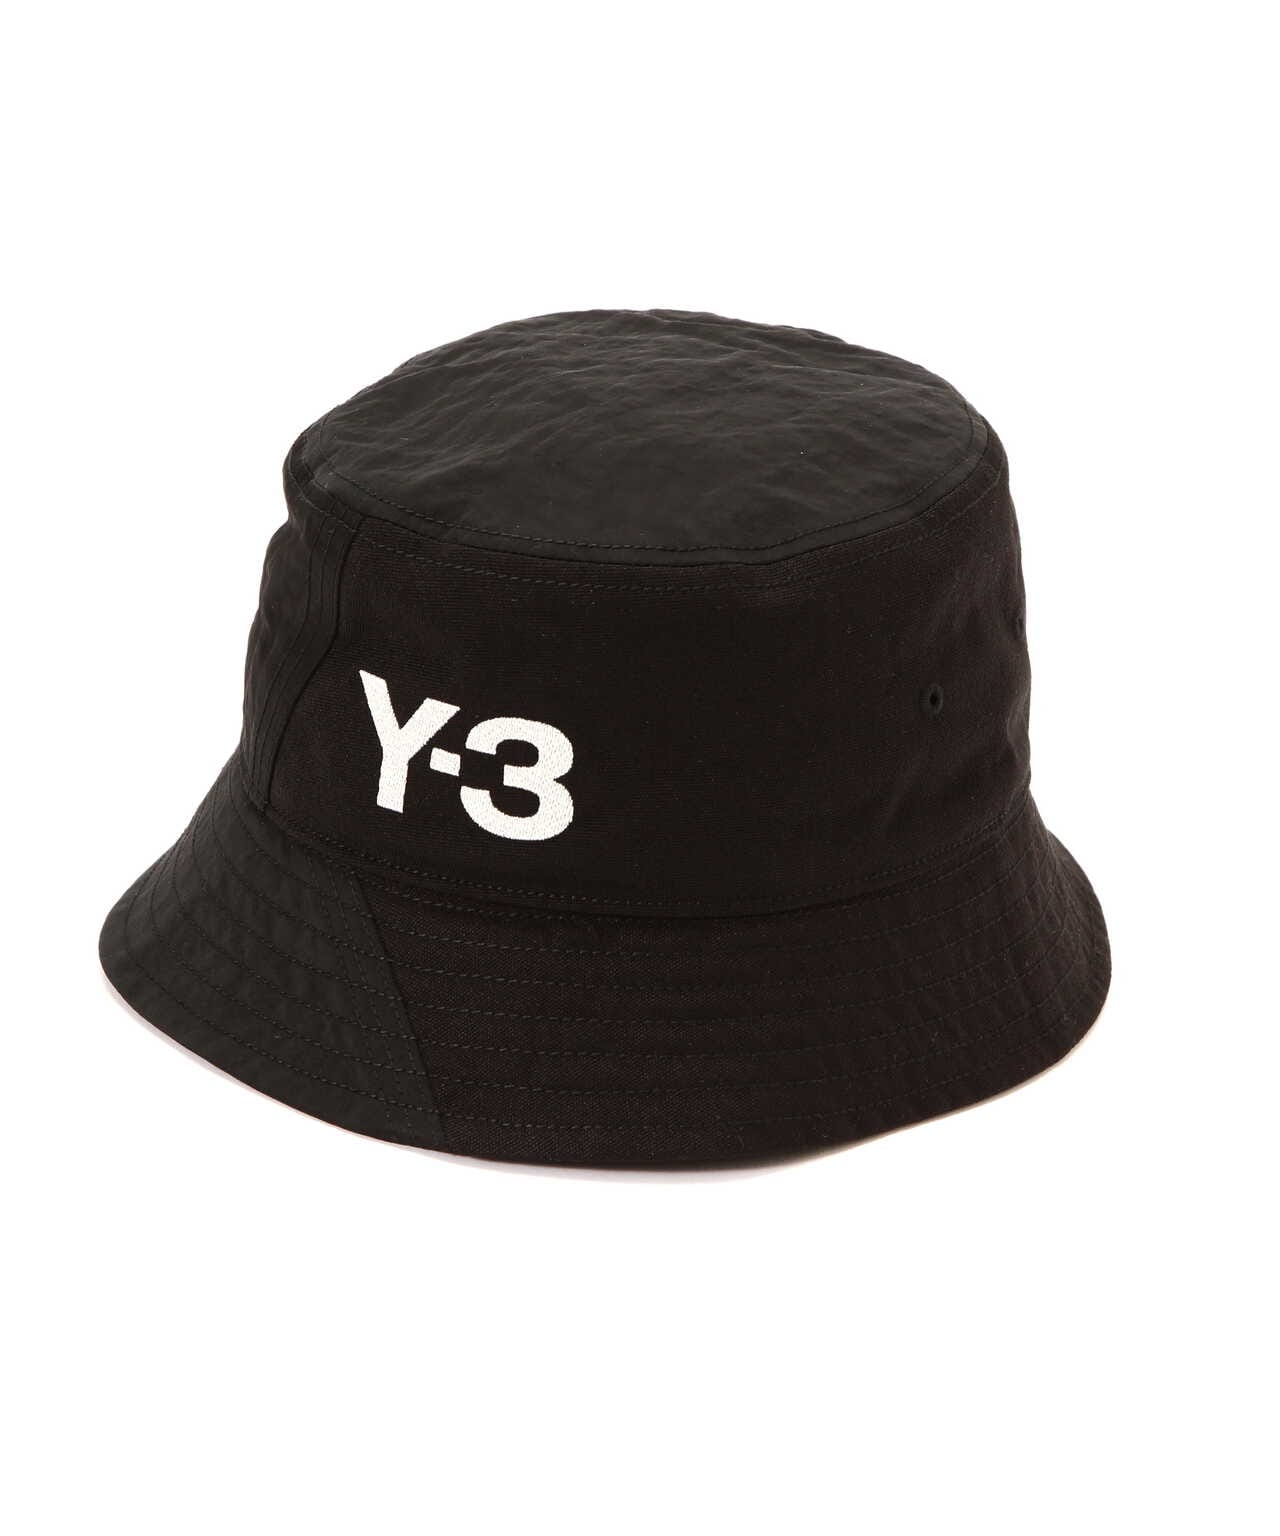 Y-3 ワイスリー バケット ハット